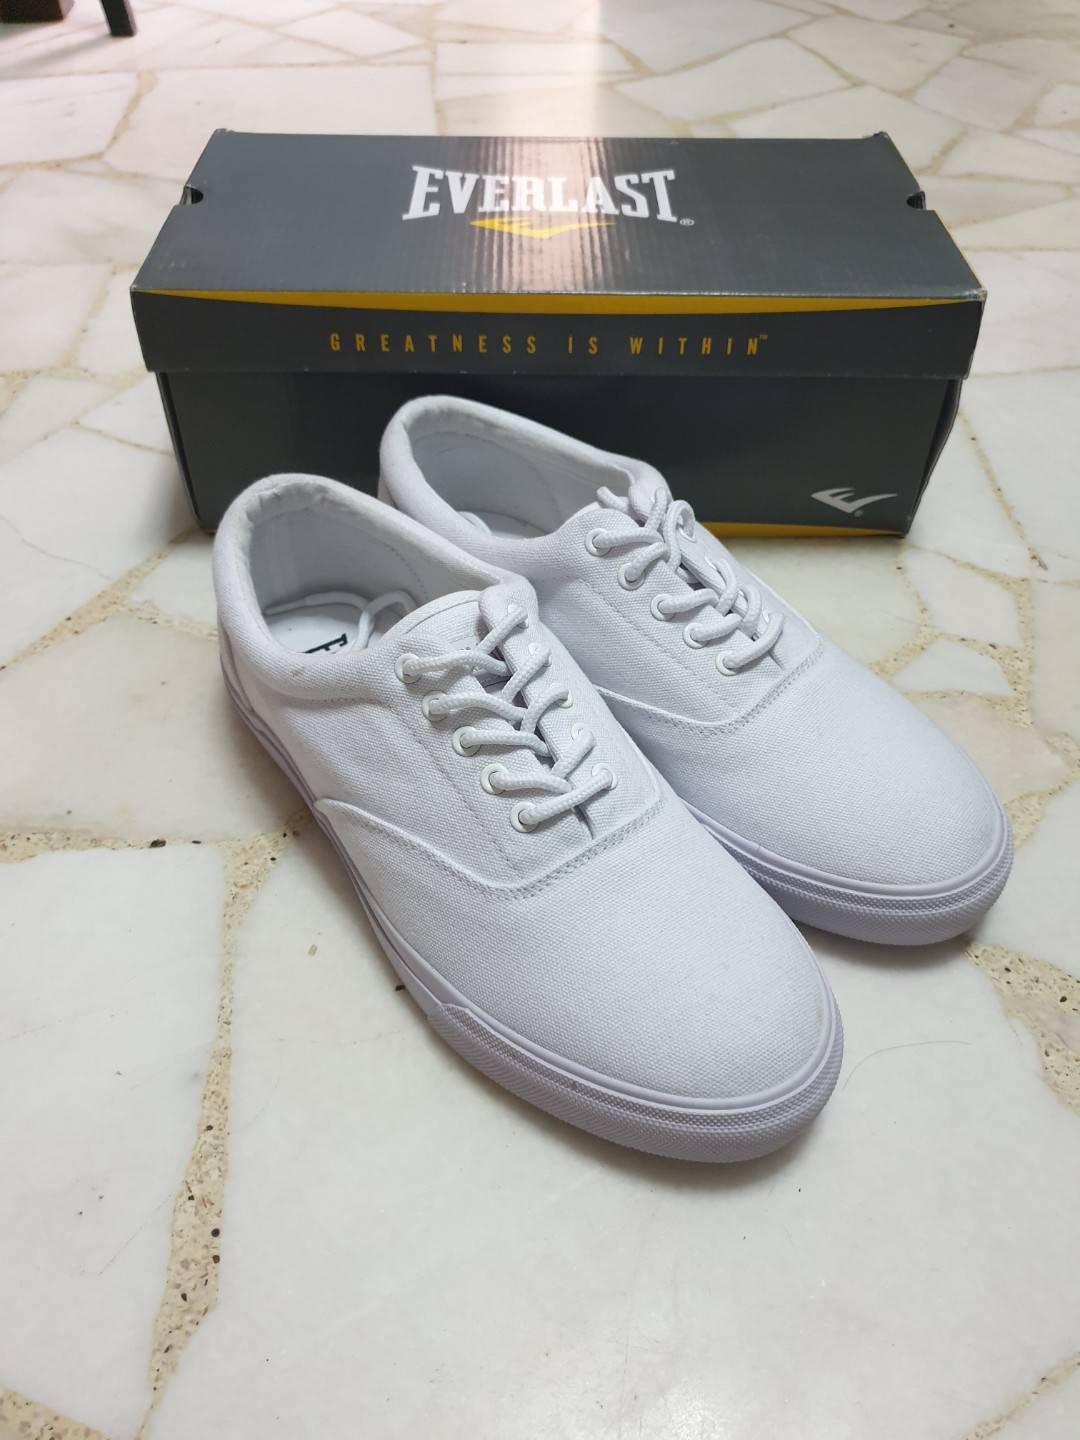 Everlast White Out Sneakers, Men's 